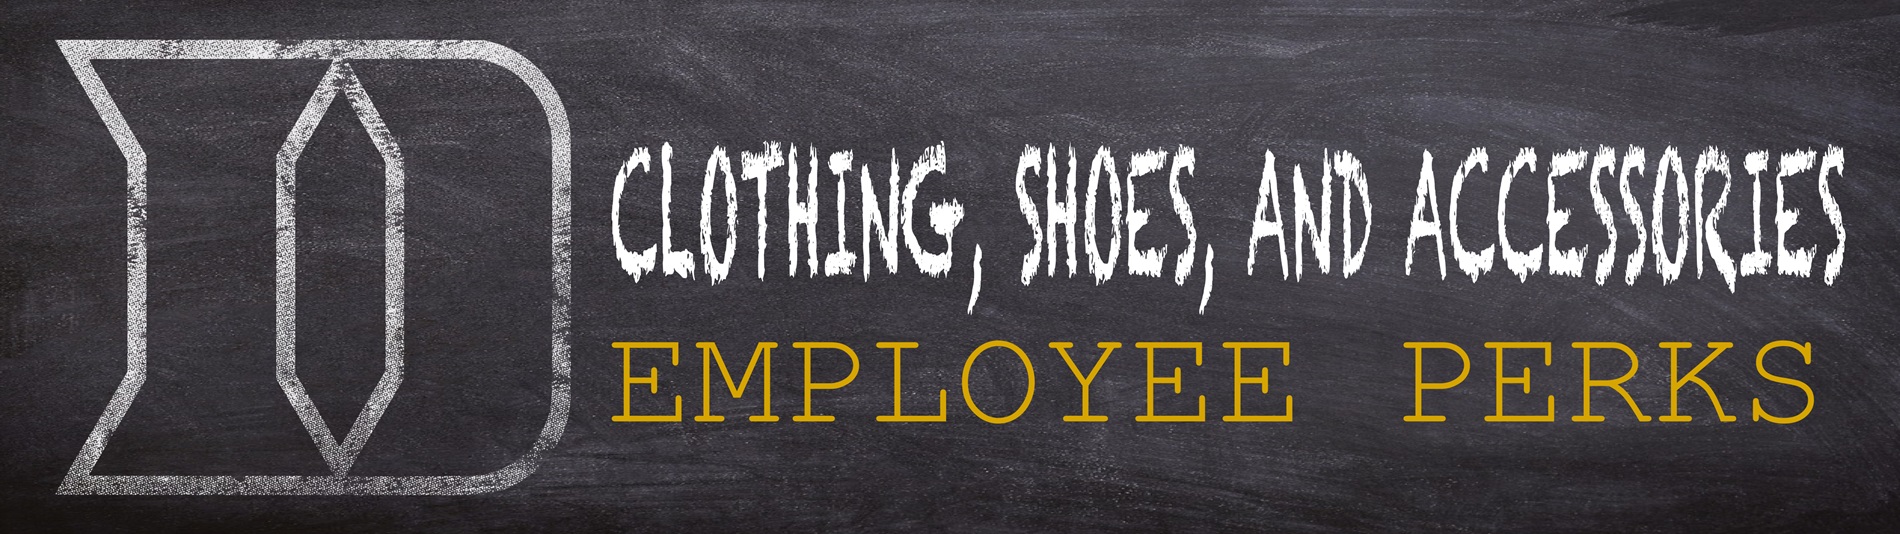 Clothing Shoes and Accessories Employee Perks Logo